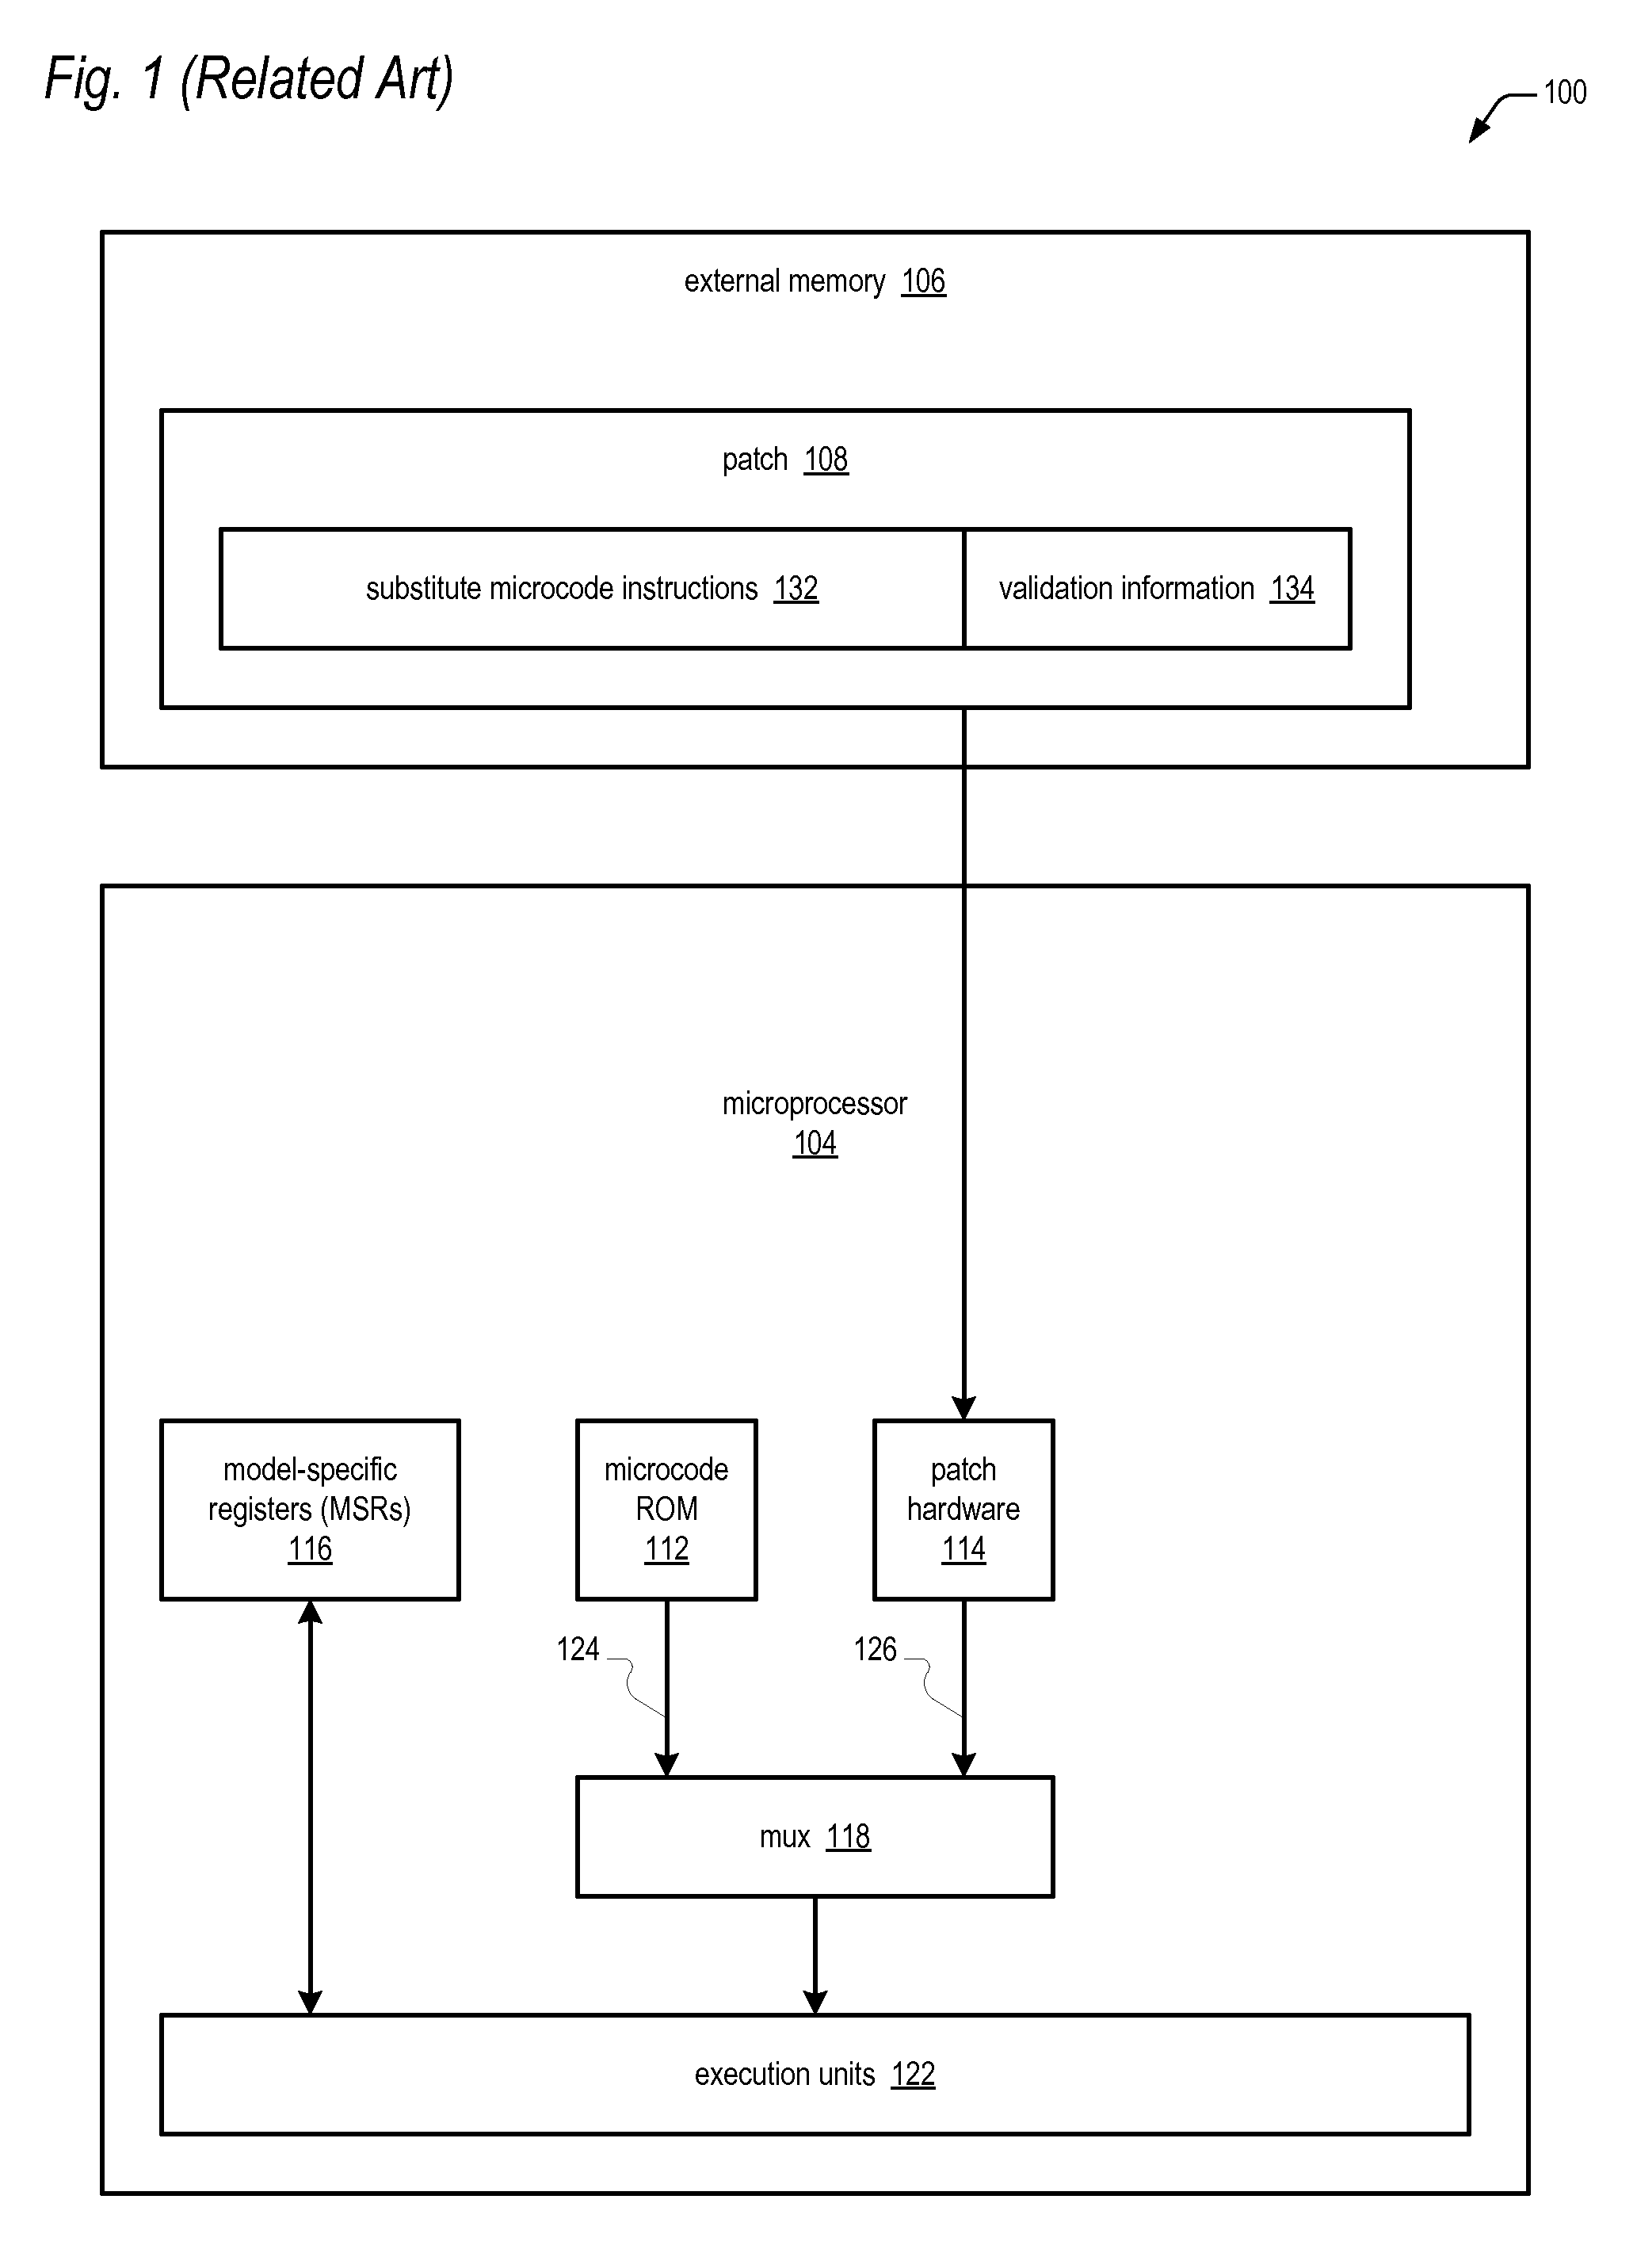 Apparatus and method for patching microcode in a microprocessor using private ram of the microprocessor